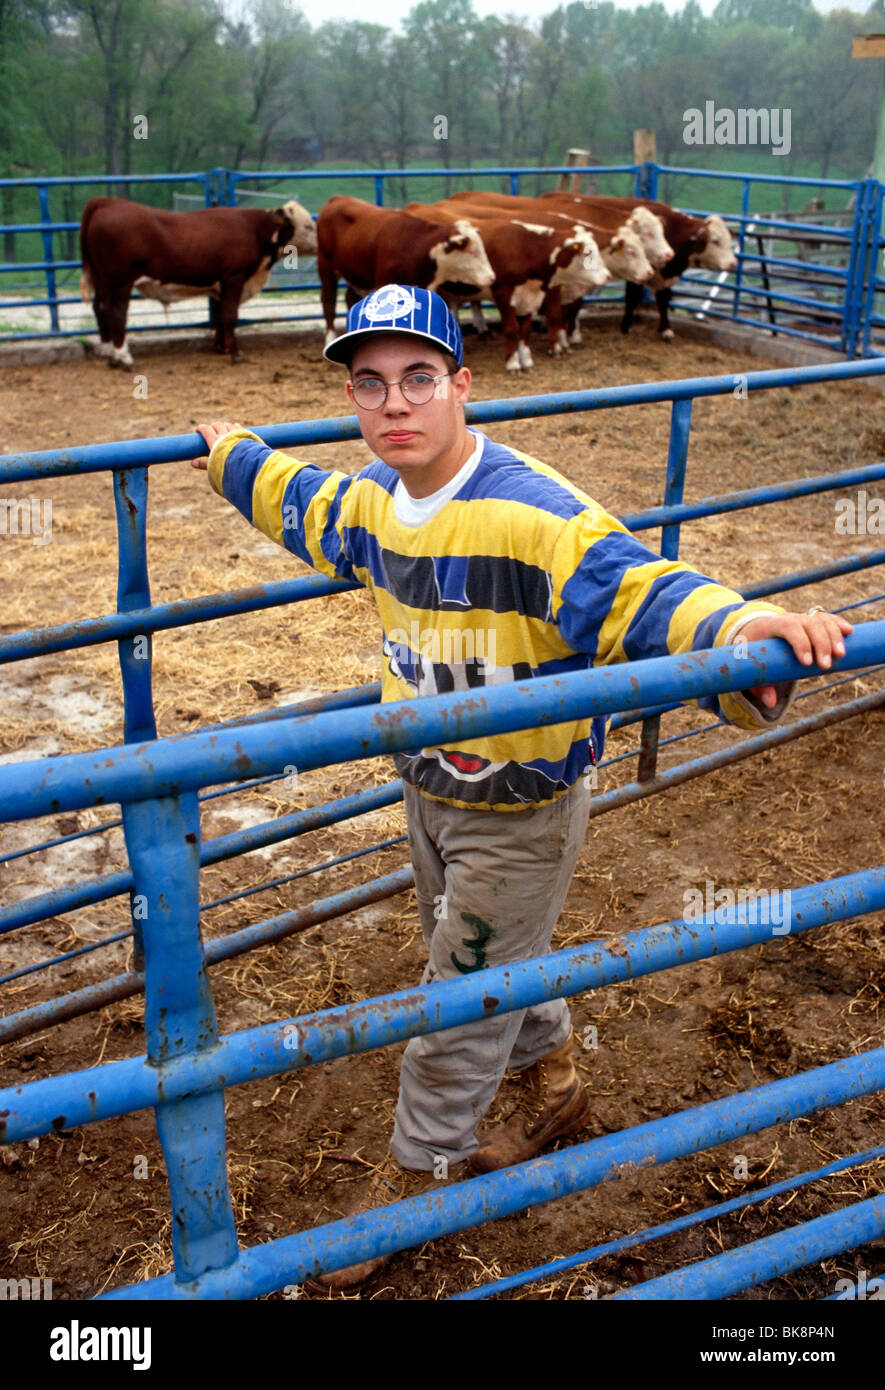 Male high school student in a barnyard corral with cattle, Saul School of Agricultural Science, Philadelphia, Pennsylvania, USA Stock Photo